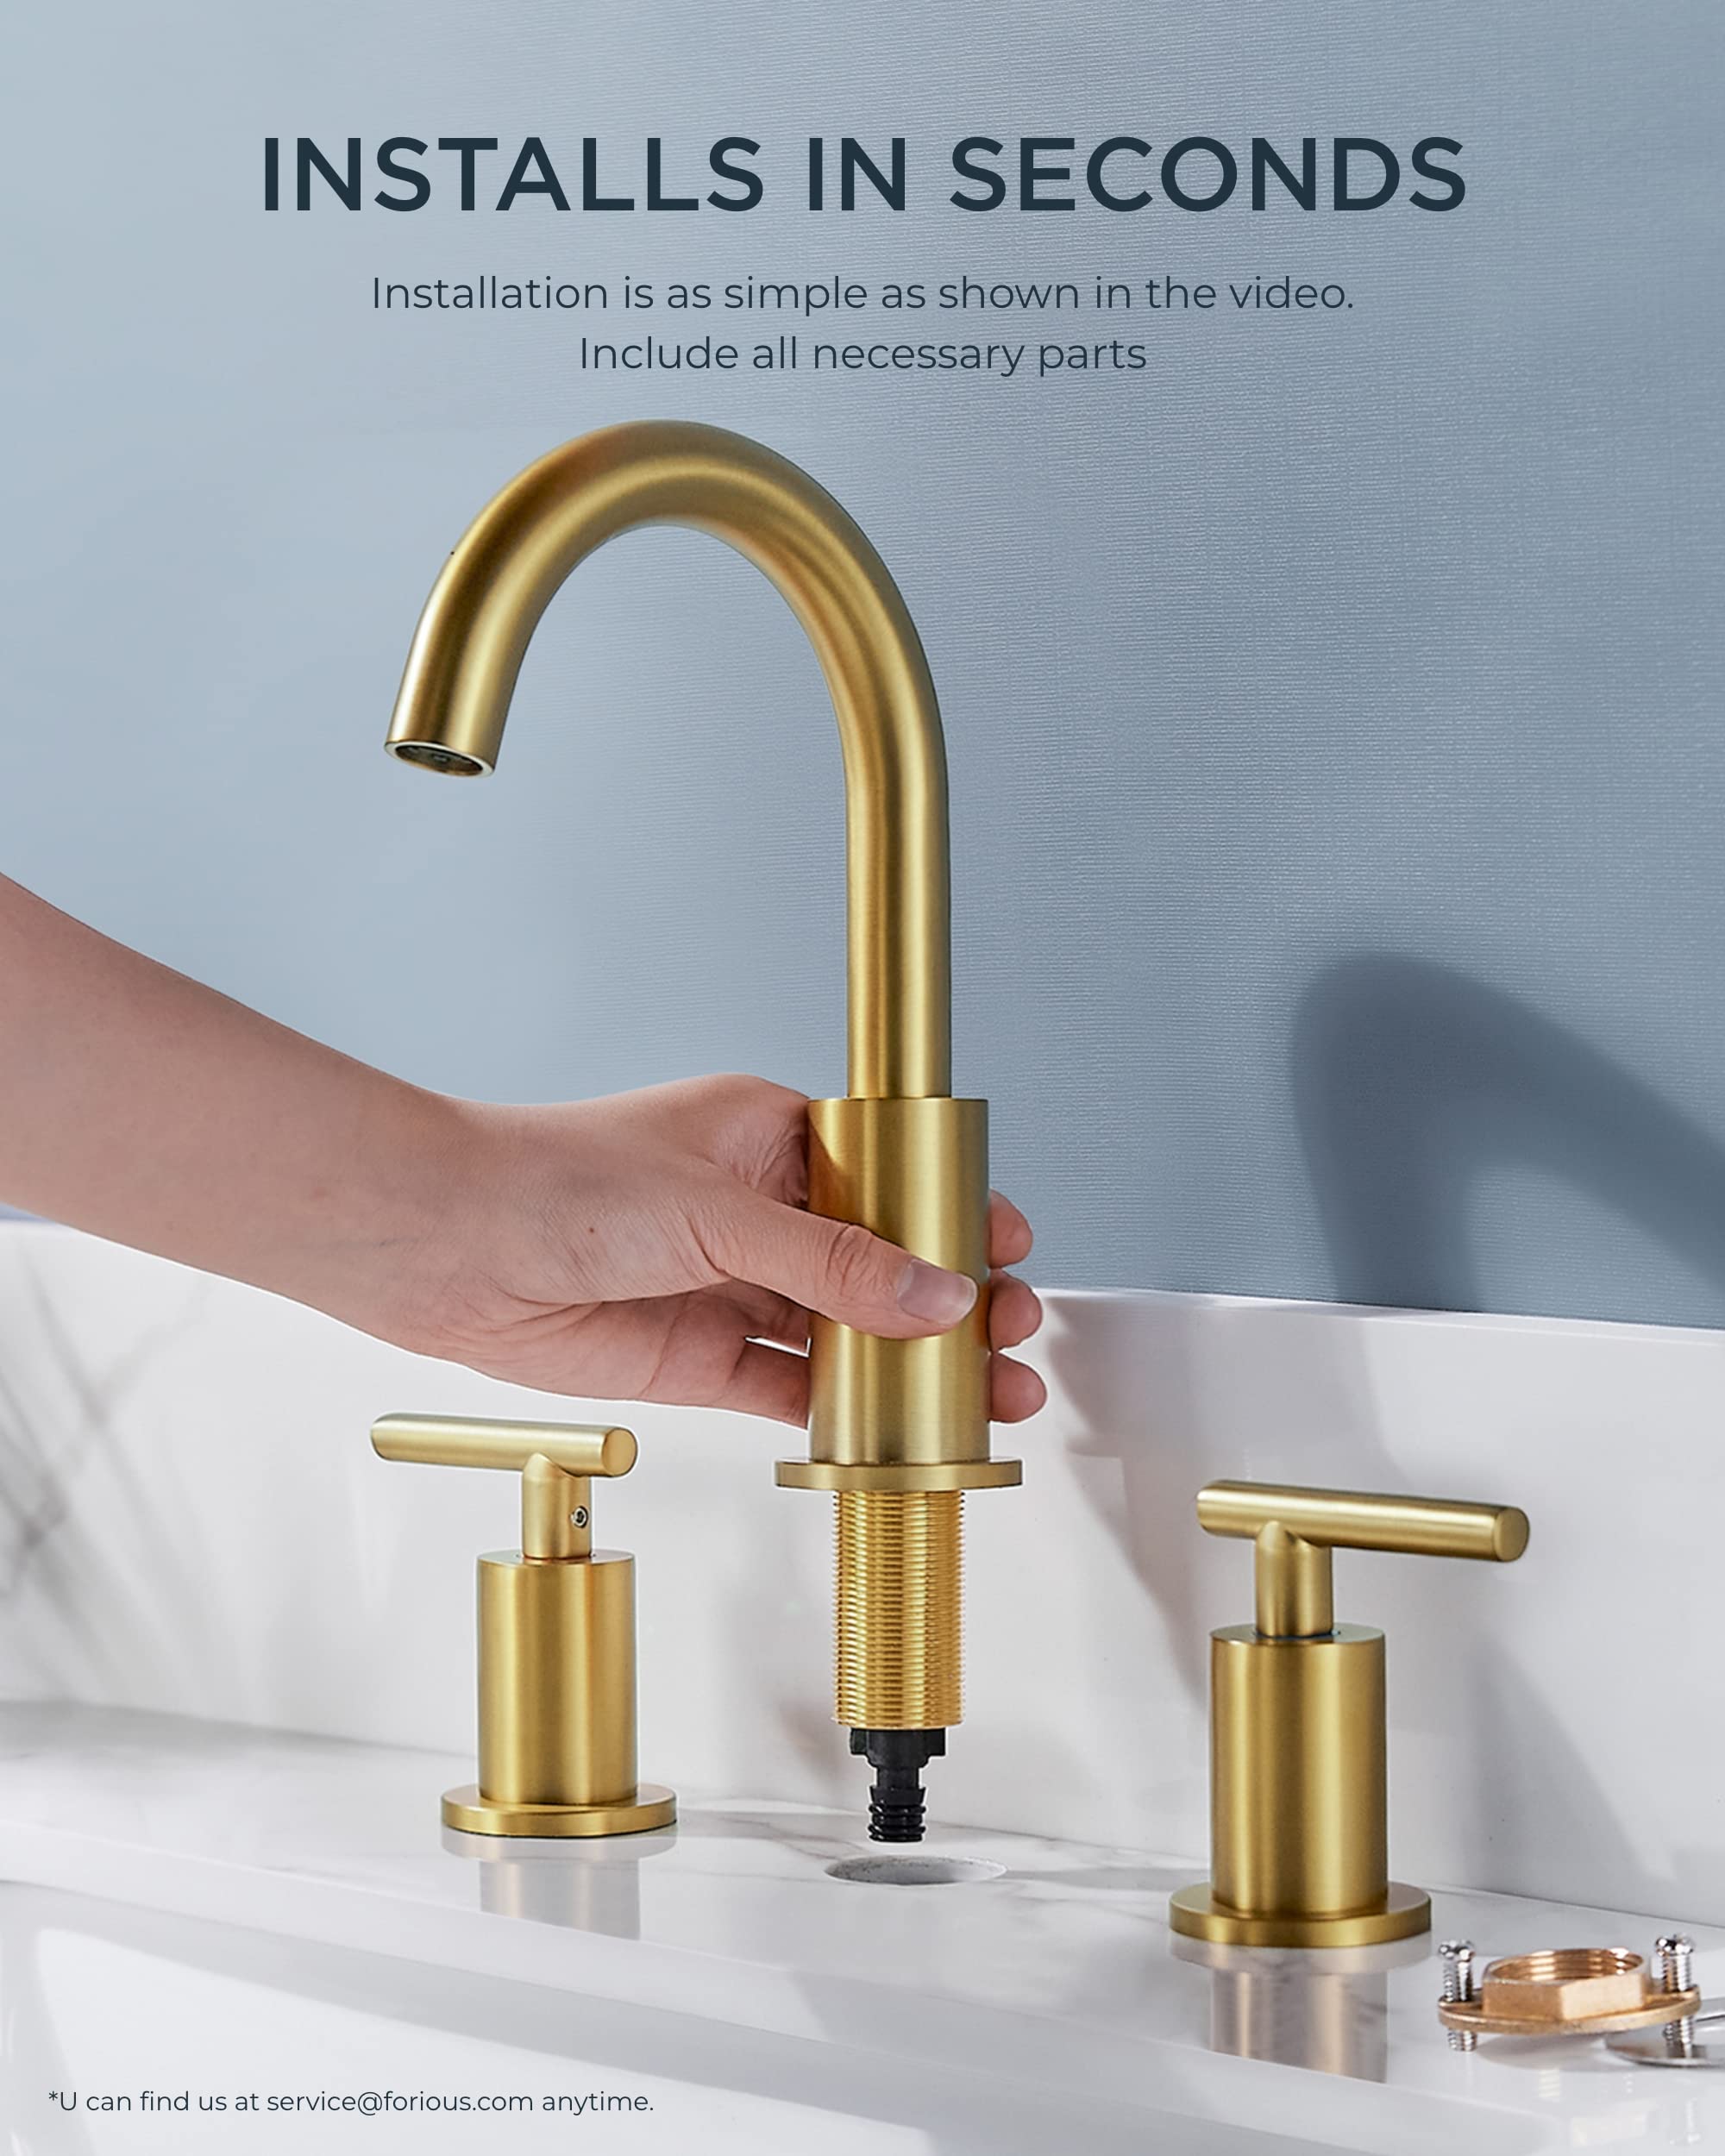 FORIOUS Brushed Gold Bathroom Faucet 3 Hole, Two Handle Bathroom Sink Faucet Gold with Metal Overflow Drain, 8 inch Widespread Bathroom Faucet with 360° Swivel Gooseneck, Gold Faucet for Bathroom Sink